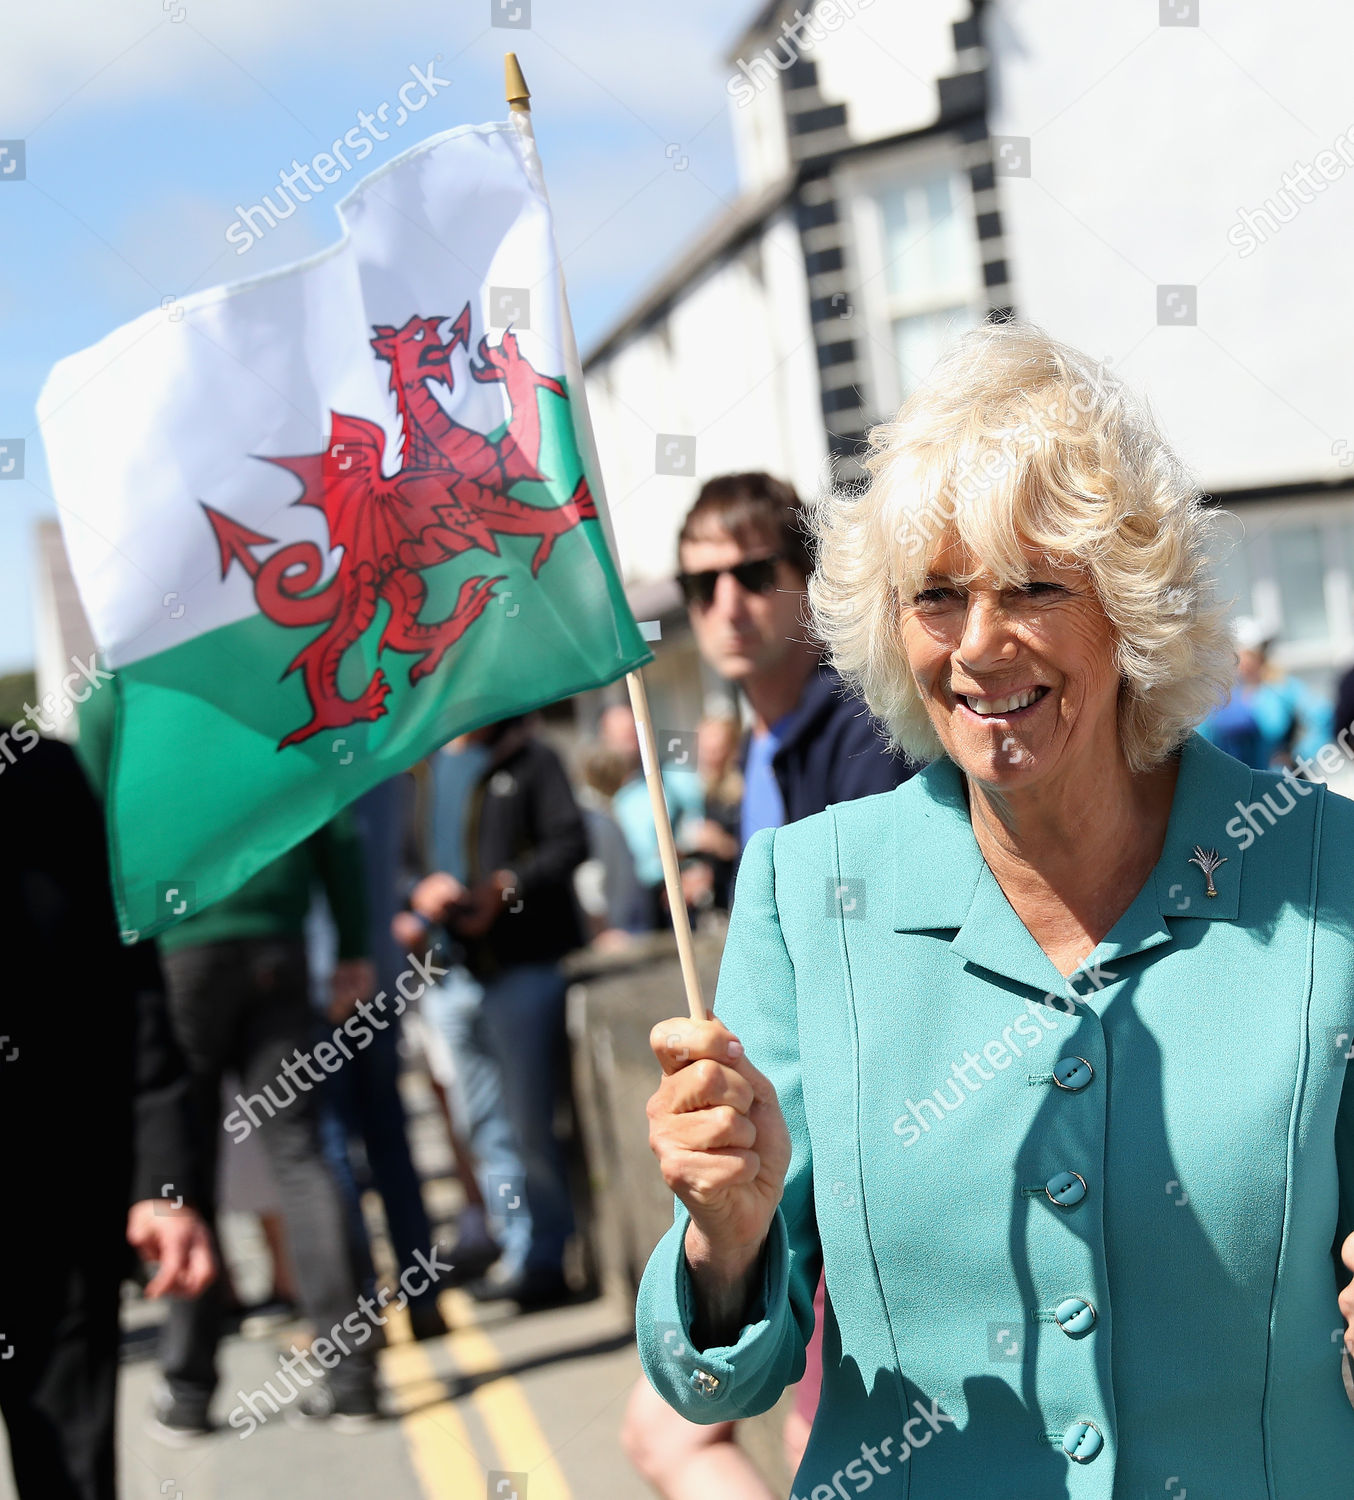 prince-charles-and-camilla-duchess-of-cornwall-annual-summer-visit-to-wales-shutterstock-editorial-5746471ac.jpg